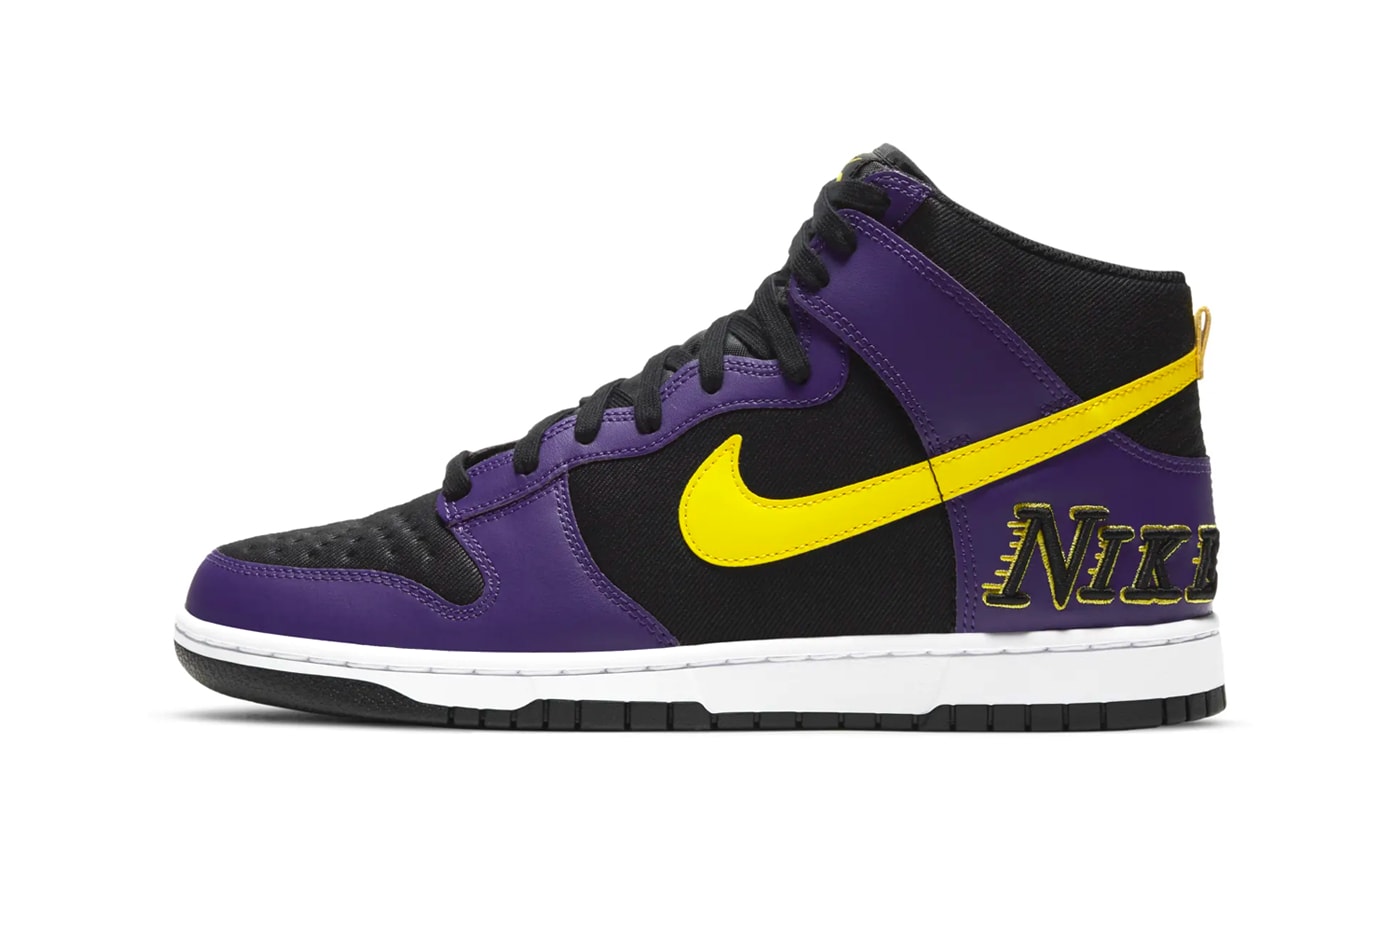 Nike Dunk High Los Angeles Lakers Court Purple Official Look Release Info DH0642-001 Buy Price Date 